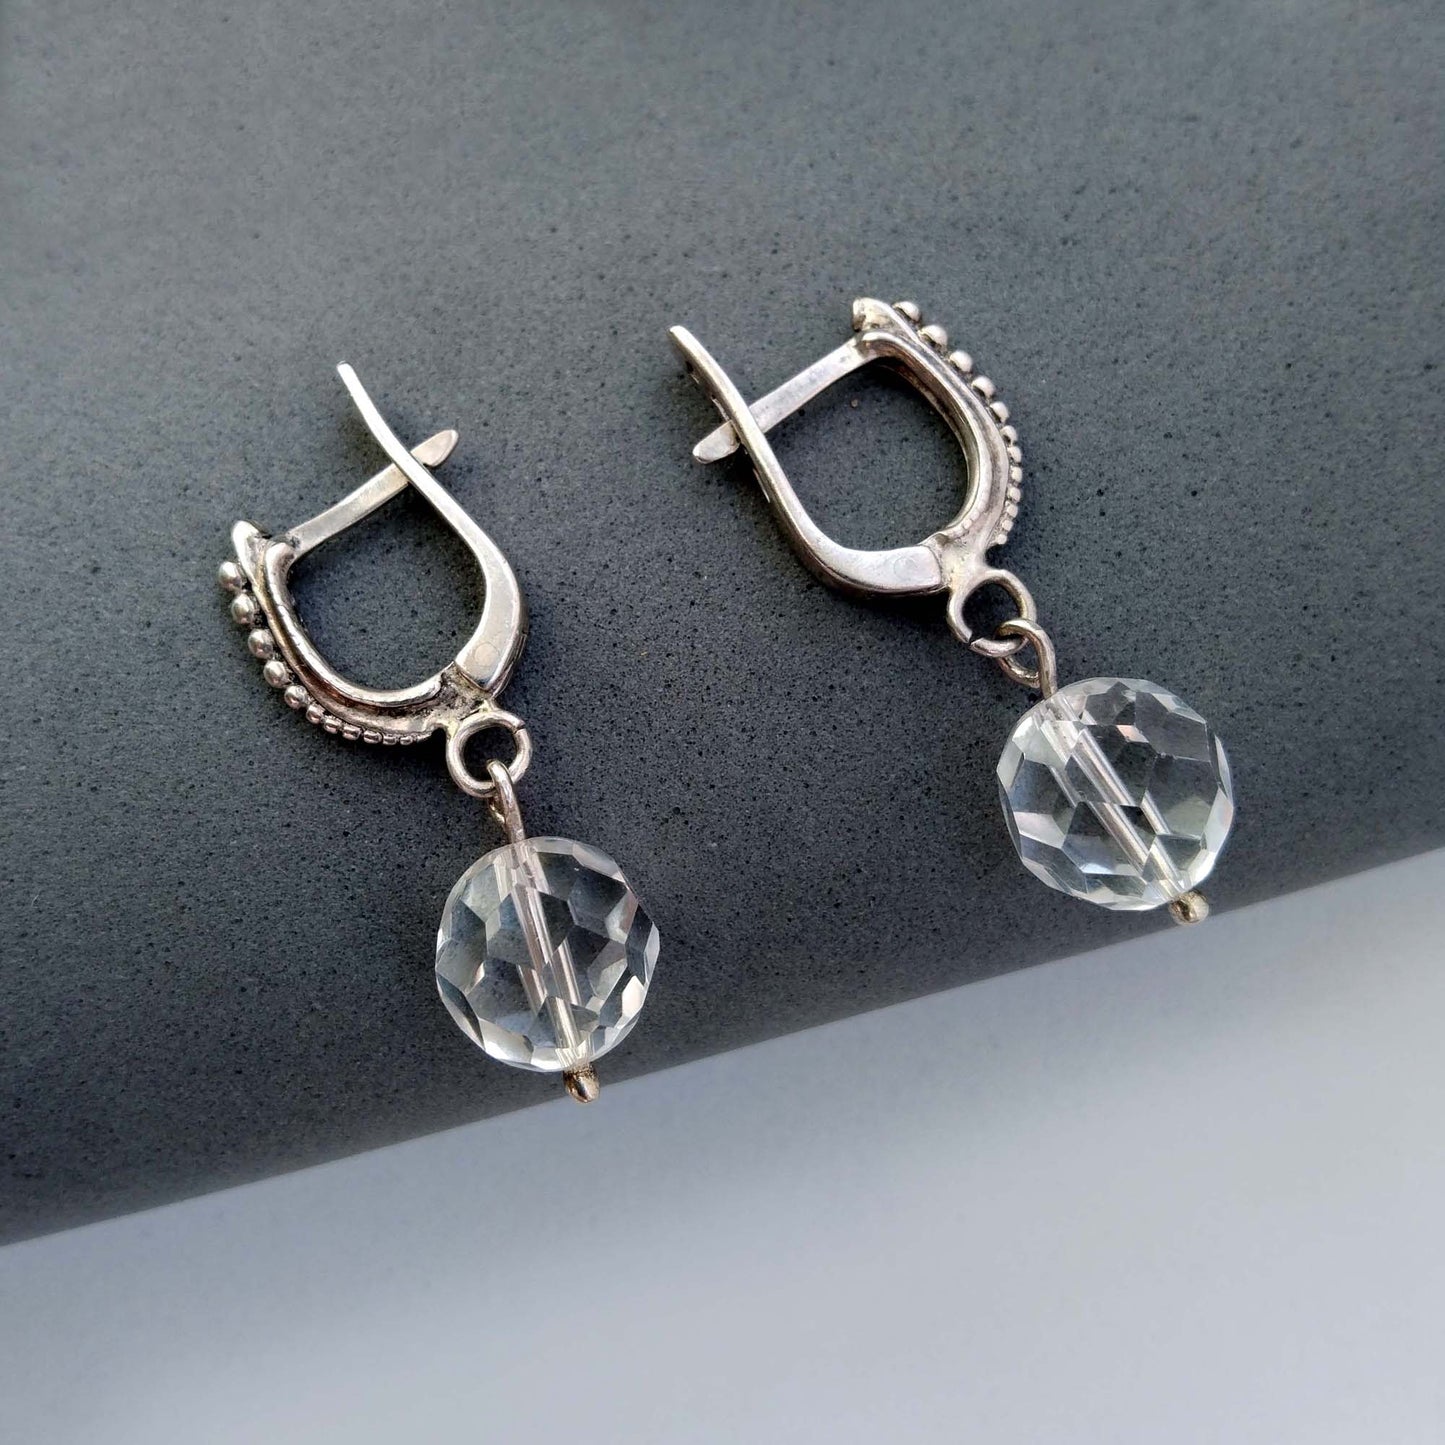 Rock Crystal Faceted Ball Earrings in Sterling Silver